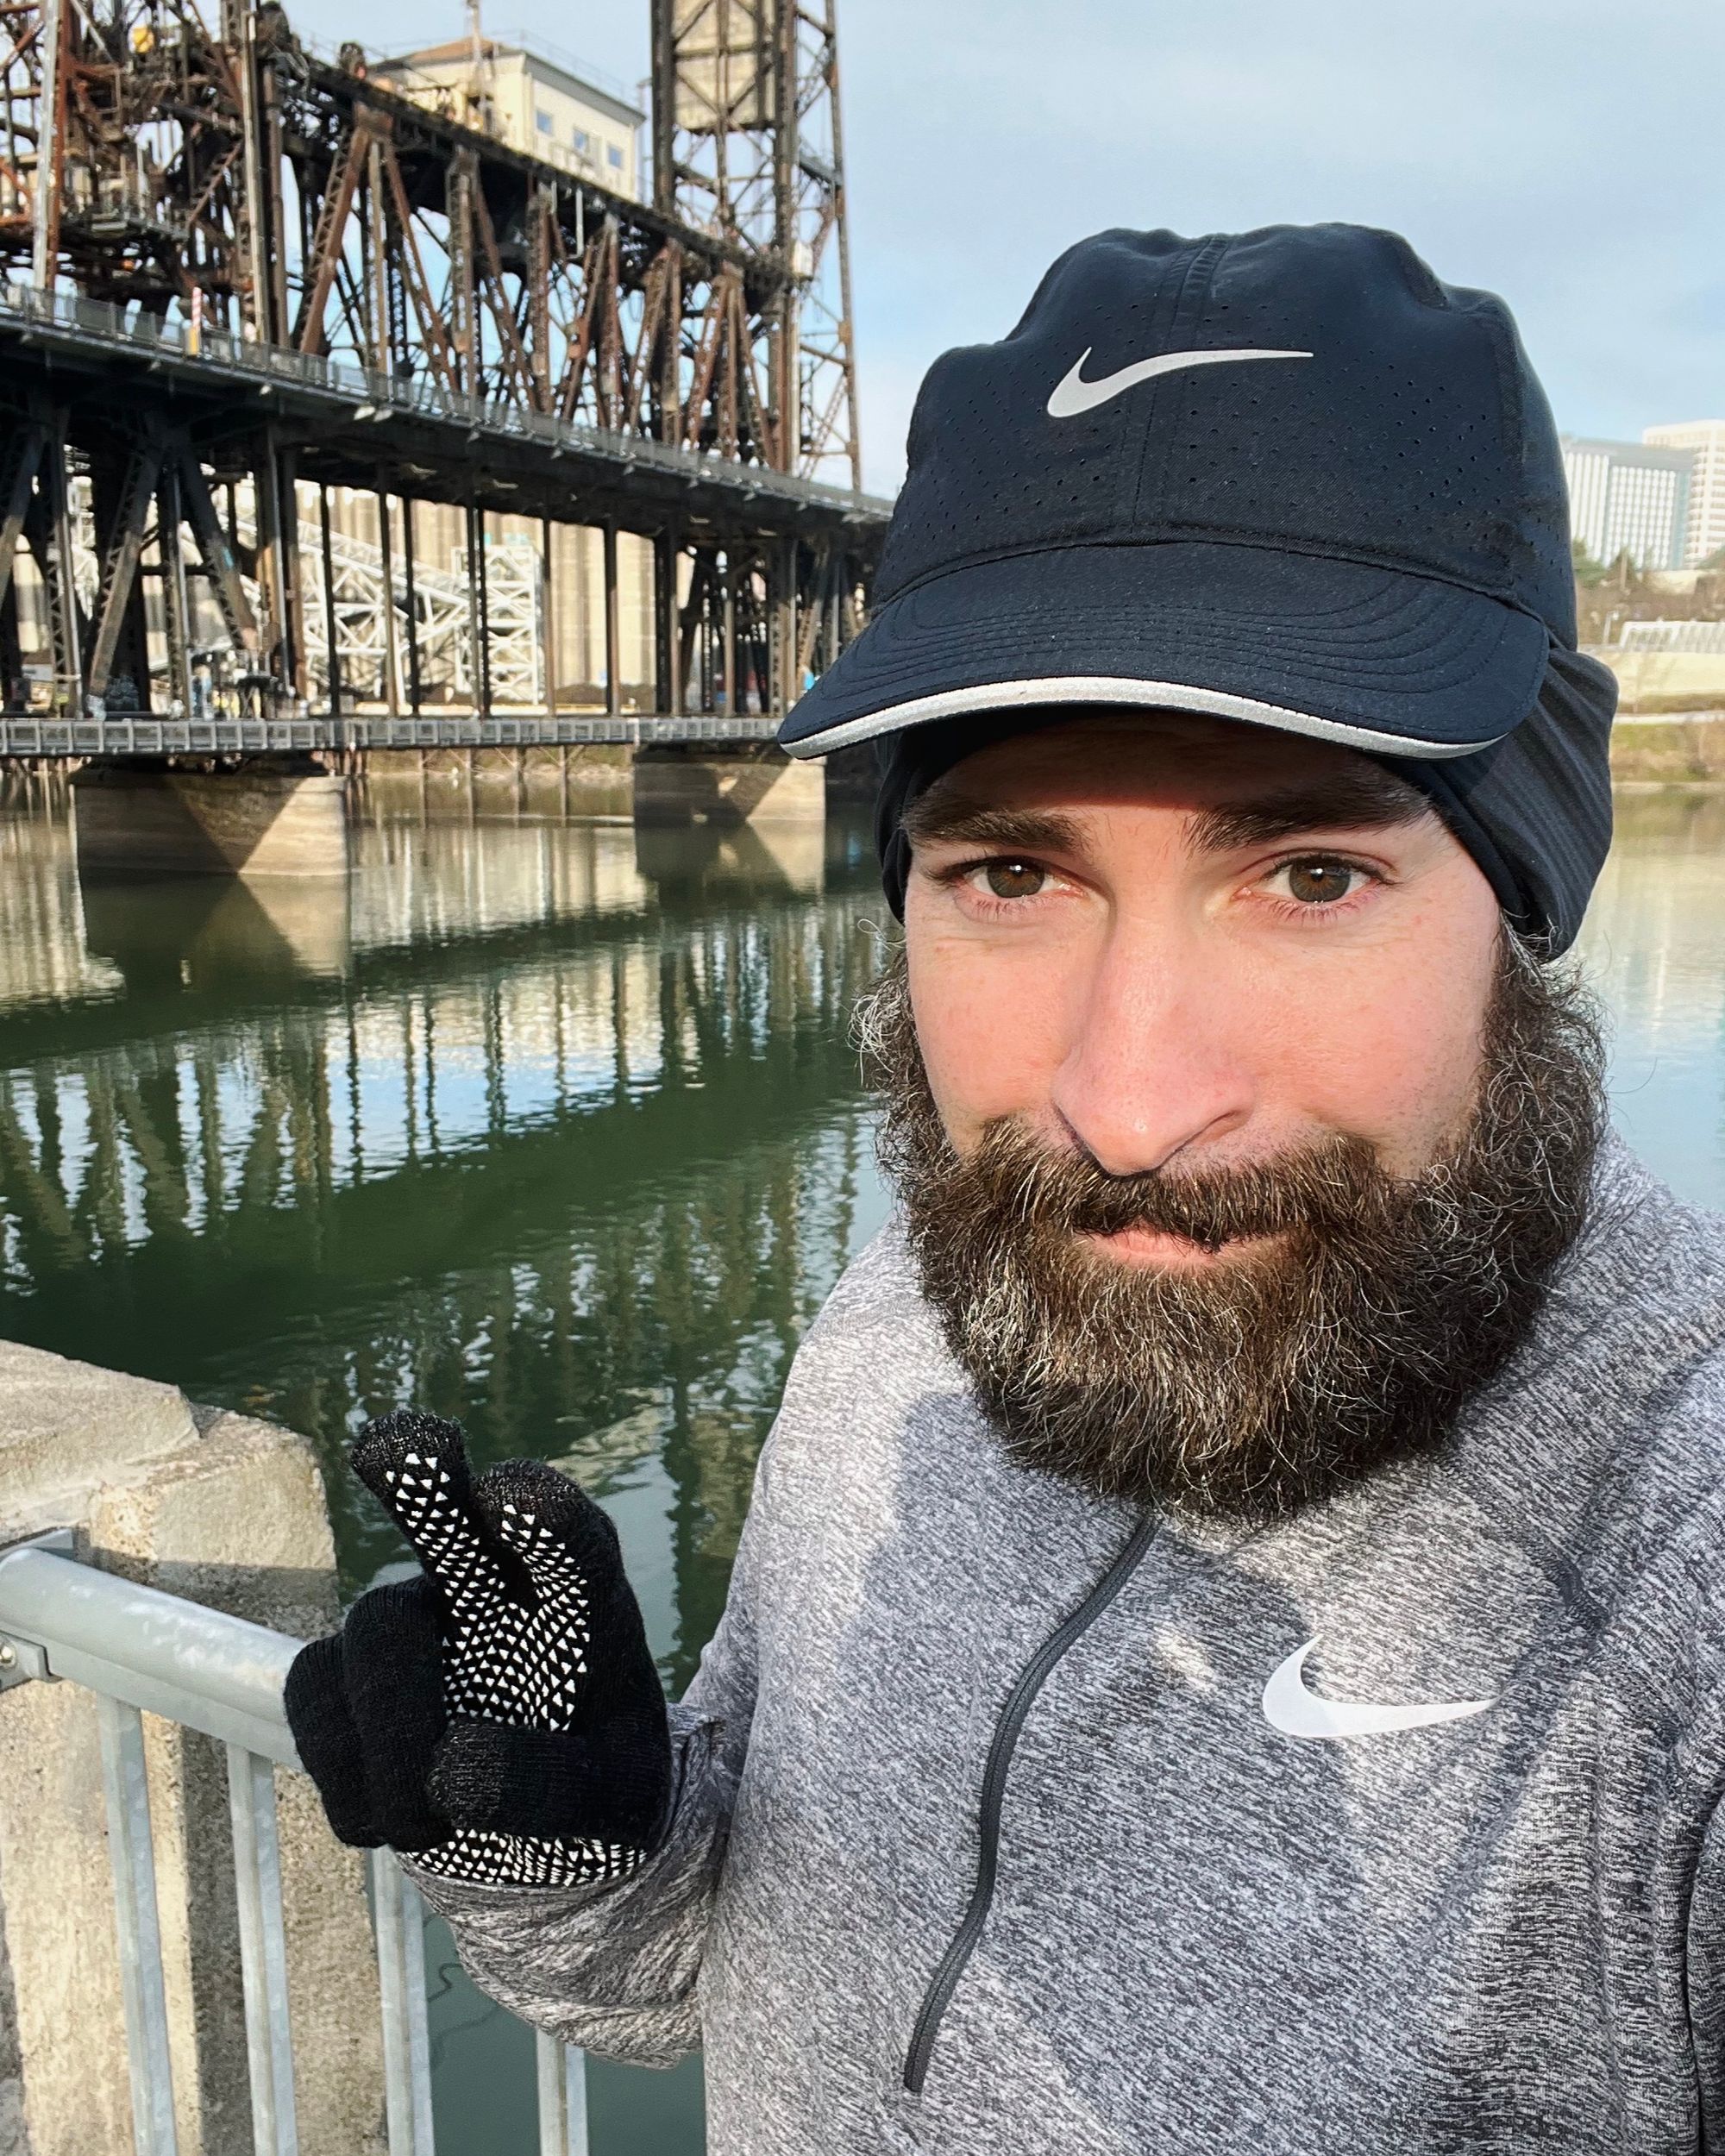 The author, out on a run, stopping for a photo with the bridge in cold Portland weather.